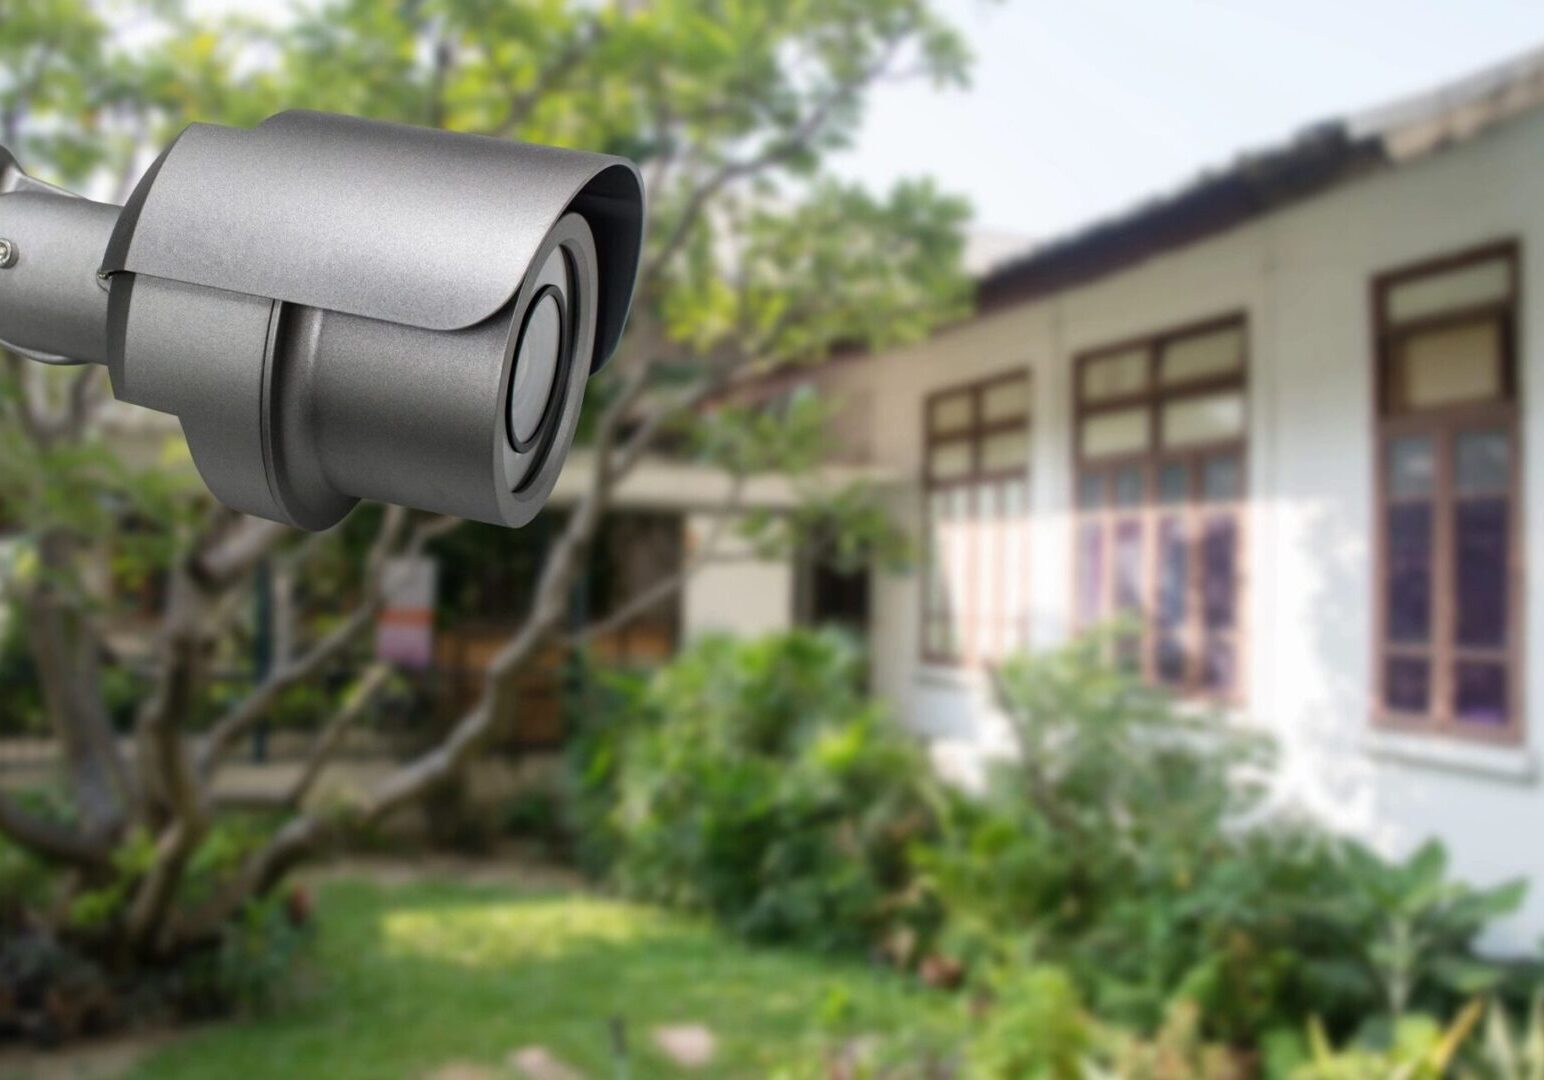 A camera is in front of a house.